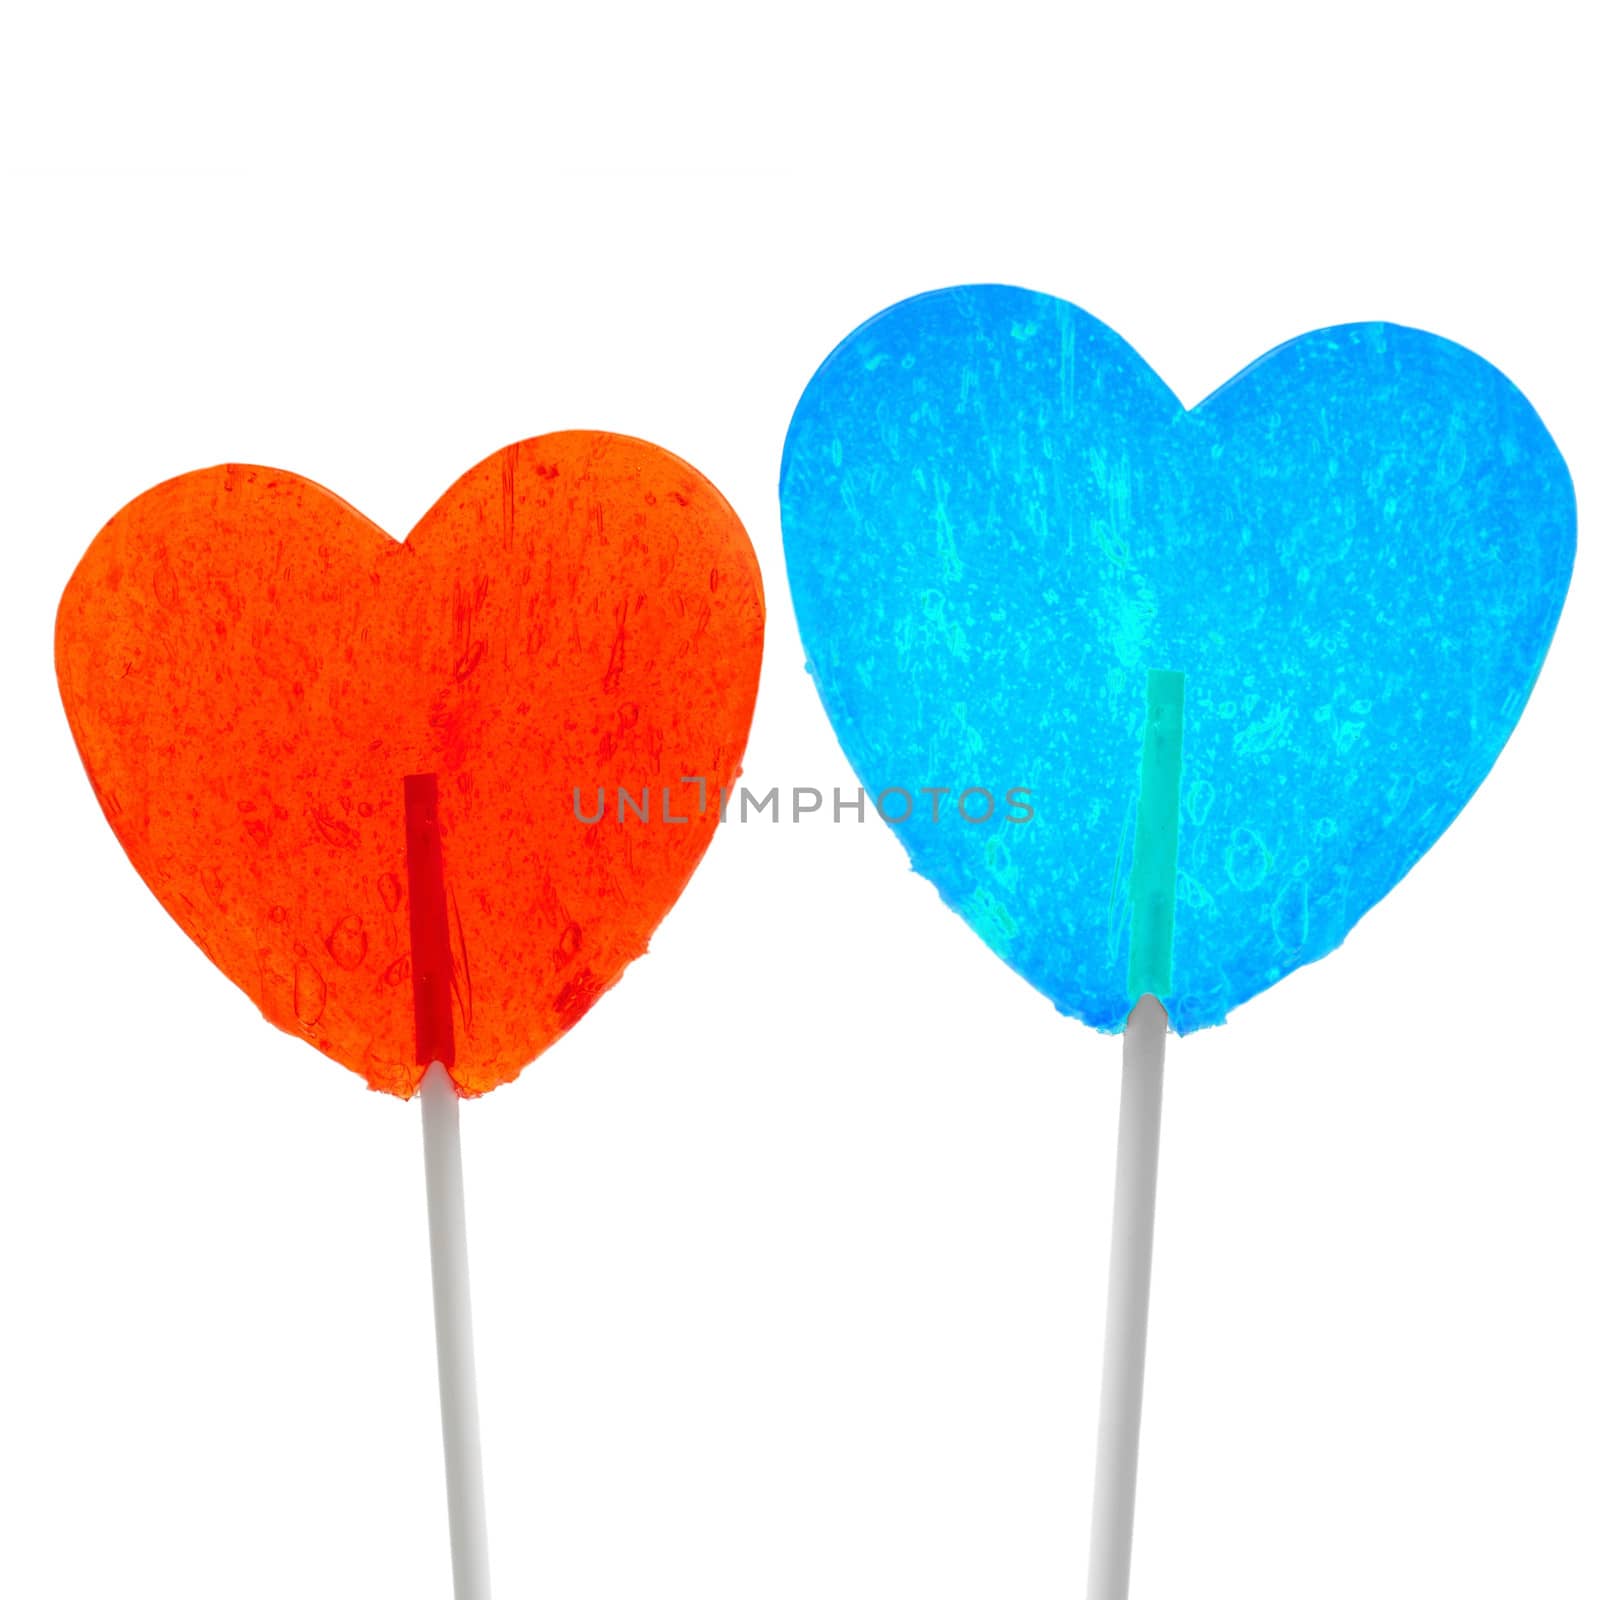 Lollipop sweetmeat heart blue isolated on white background